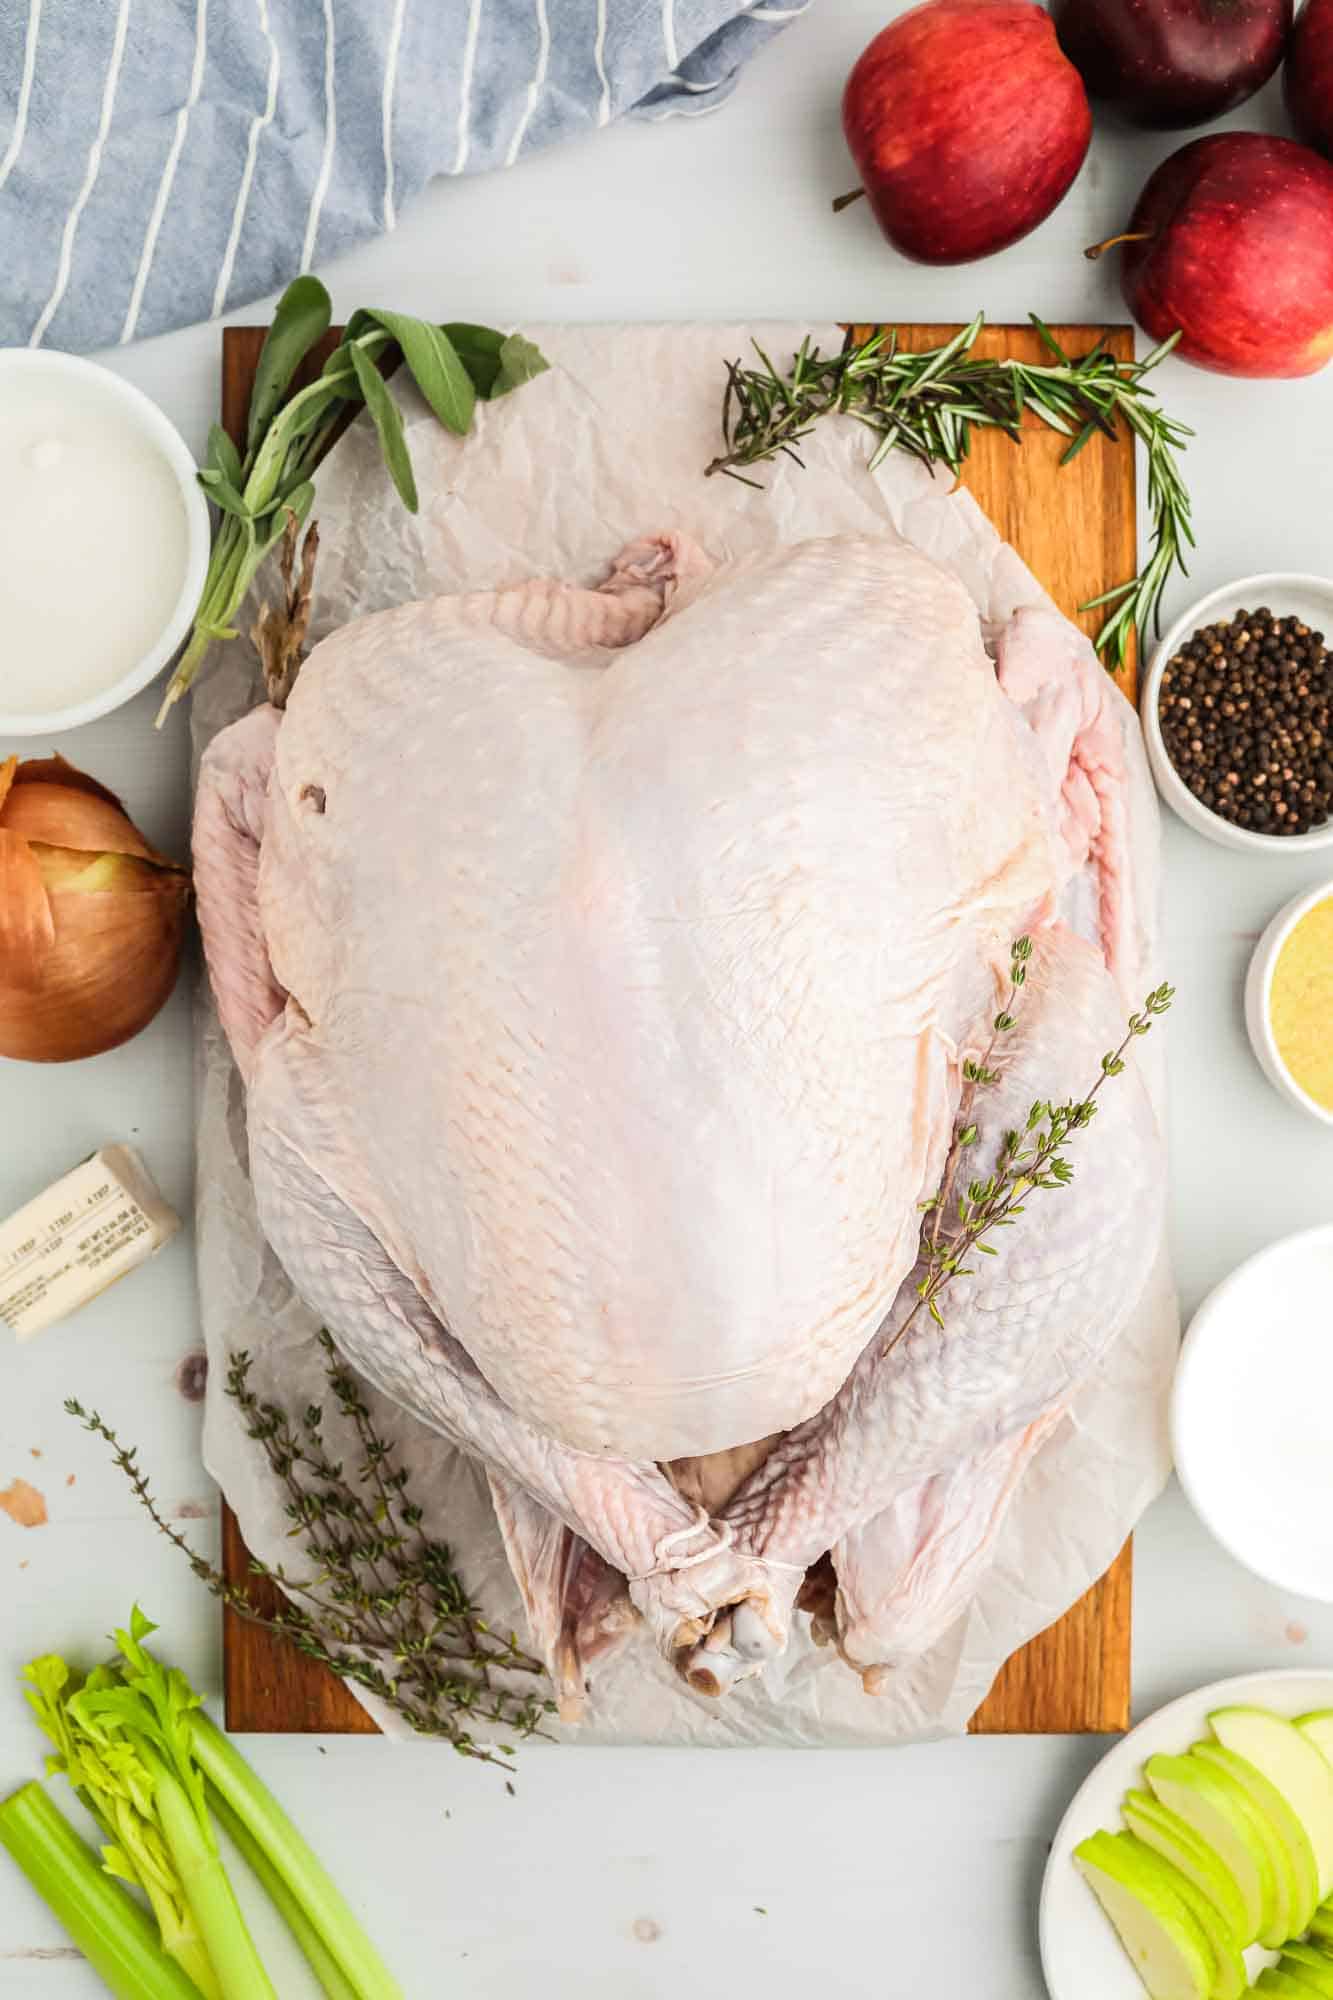 Ingredients needed for smoking a turkey